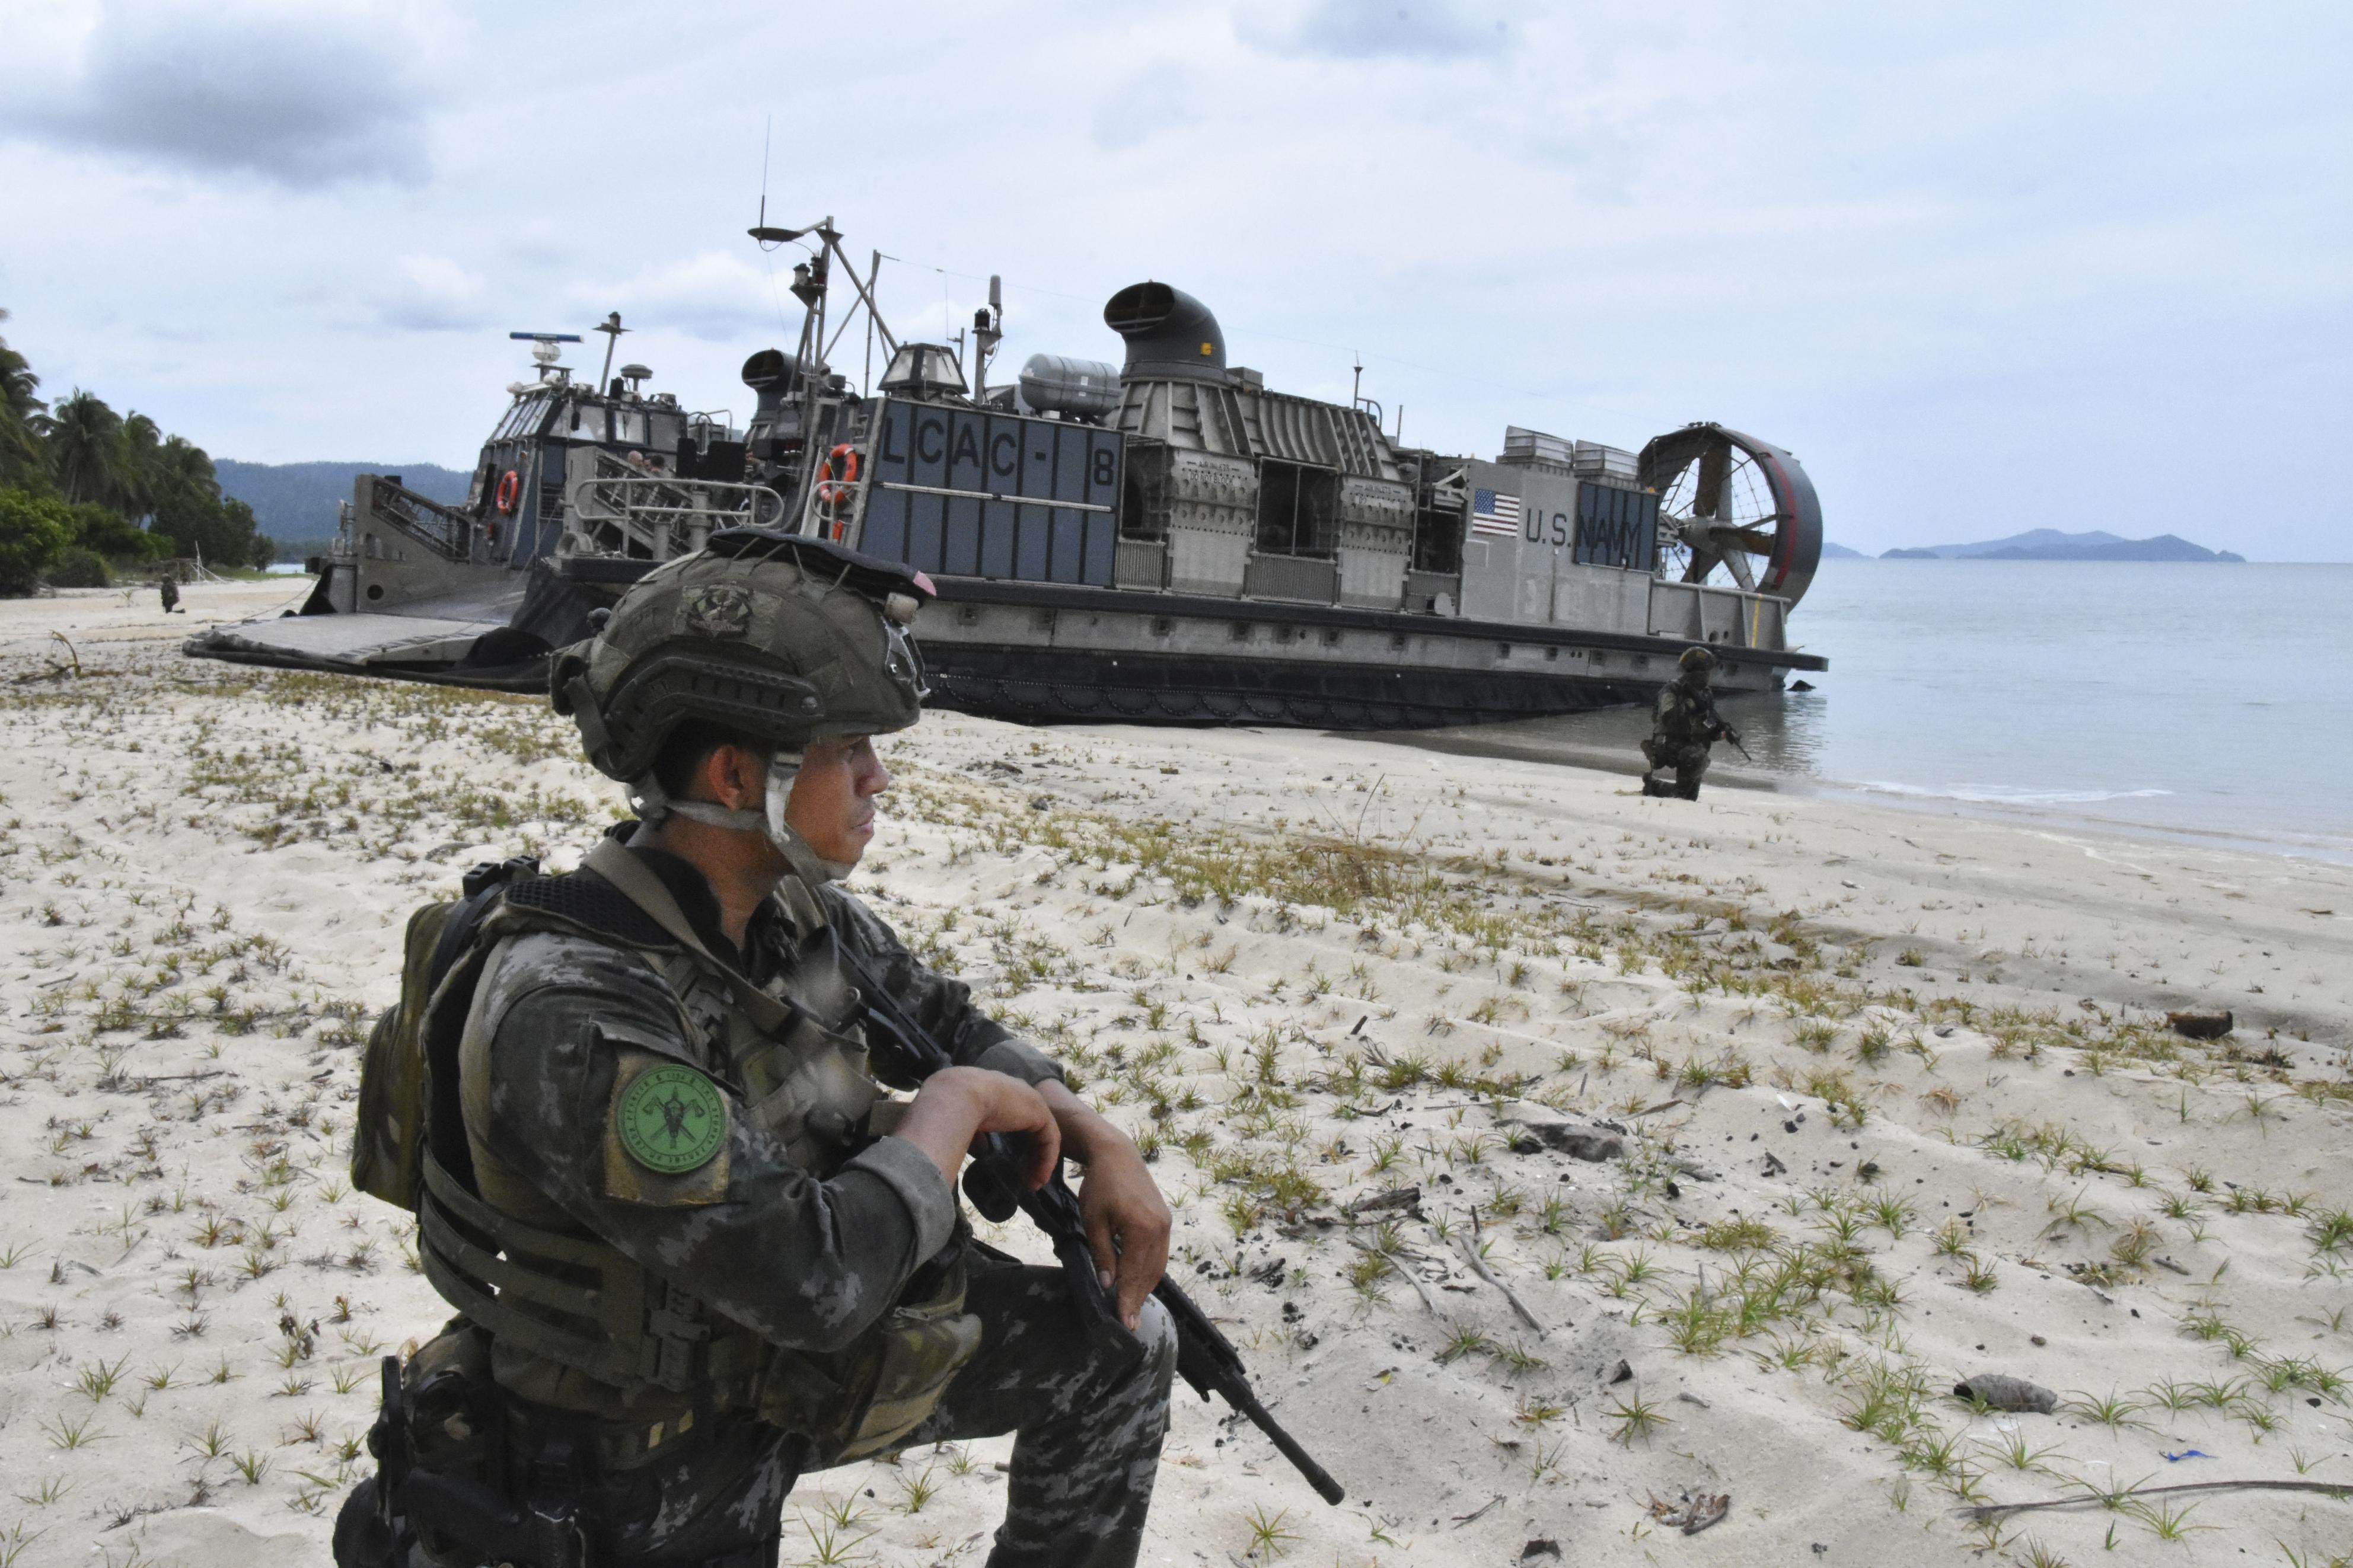 A Philippine soldier guards a US military hovercraft in Palawan on May 1 during the annual Balikatan joint military exercises. The annual combat drill this year took place outside the Philippines’ 12 nautical mile territorial waters for the first time. Photo: Kyodo